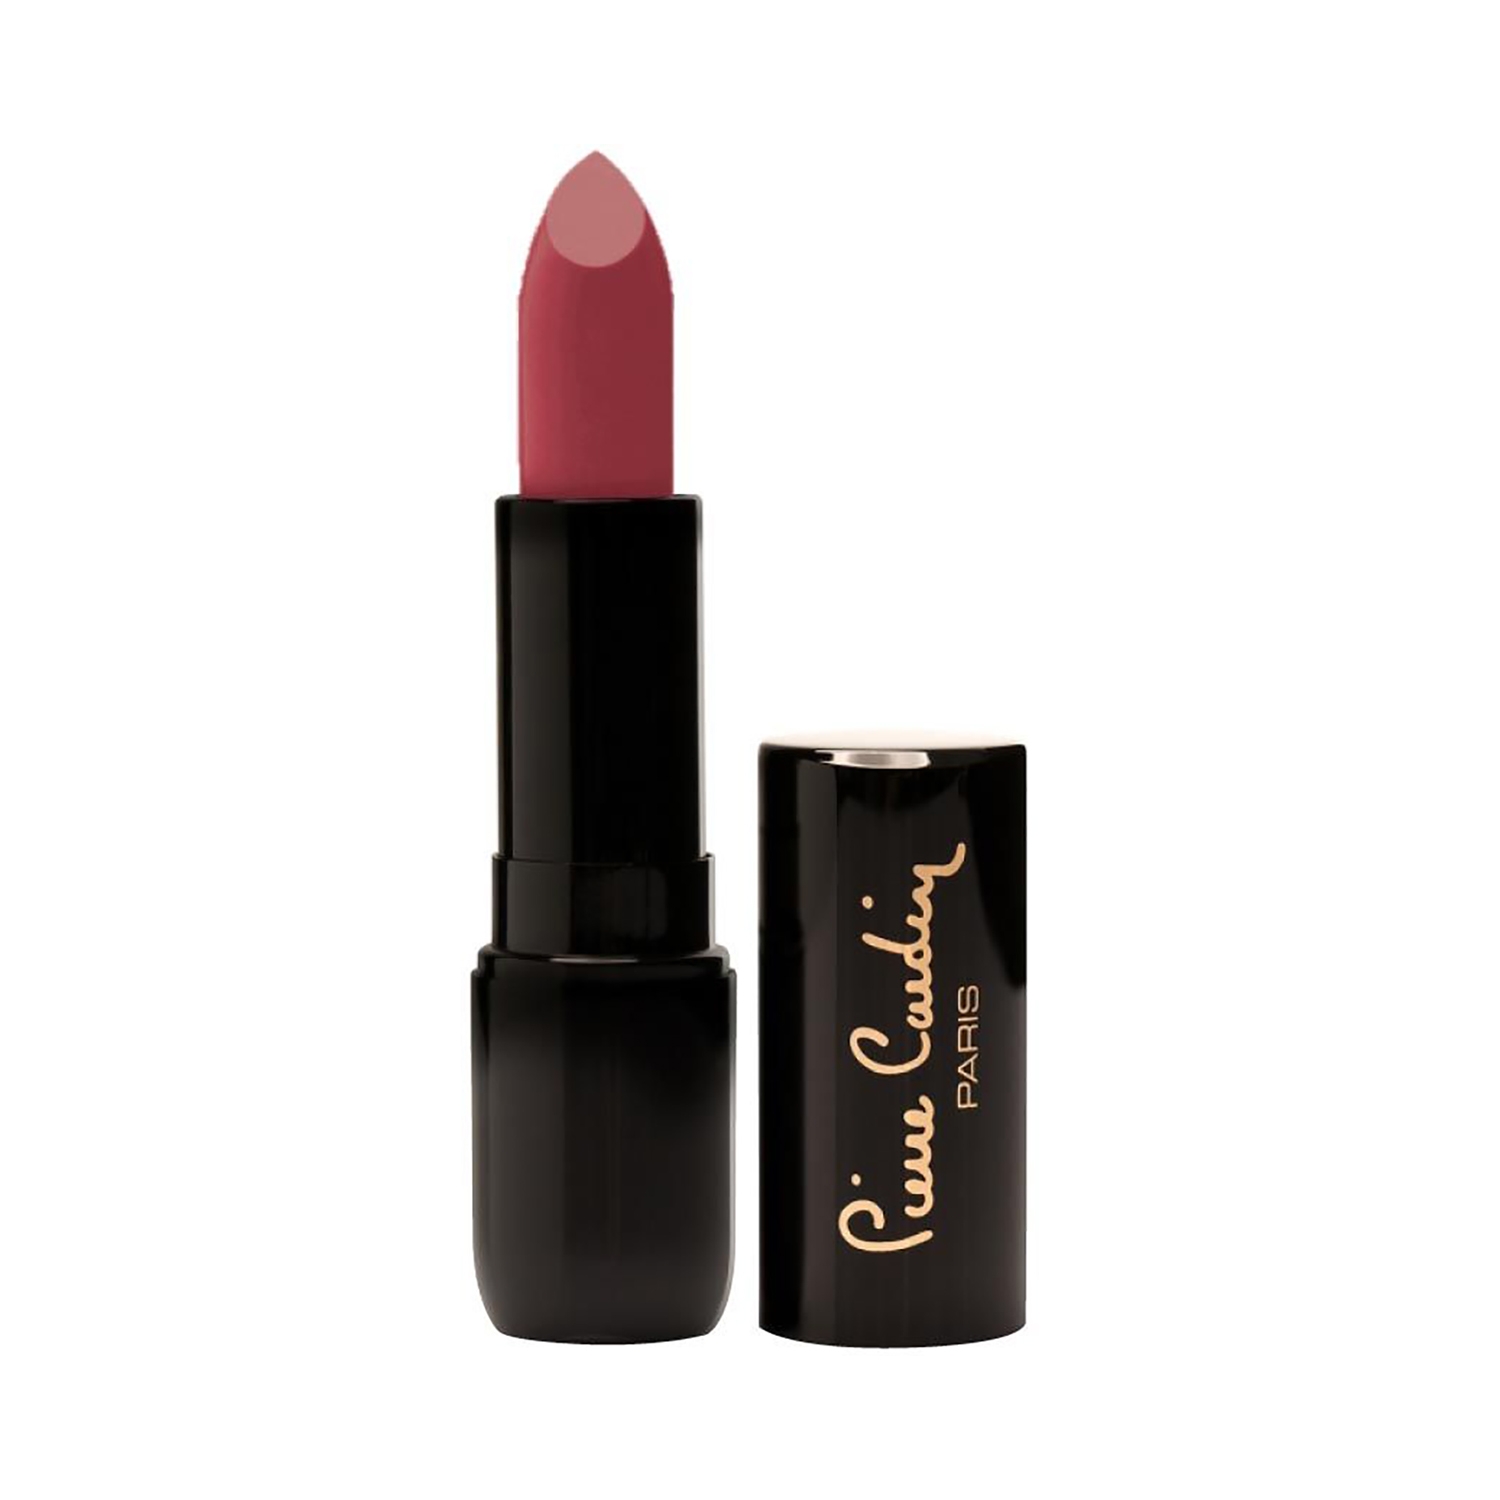 Pierre Cardin Paris | Pierre Cardin Paris Porcelain Edition Rouge Lipstick - 231 Berry Rouge (4g)